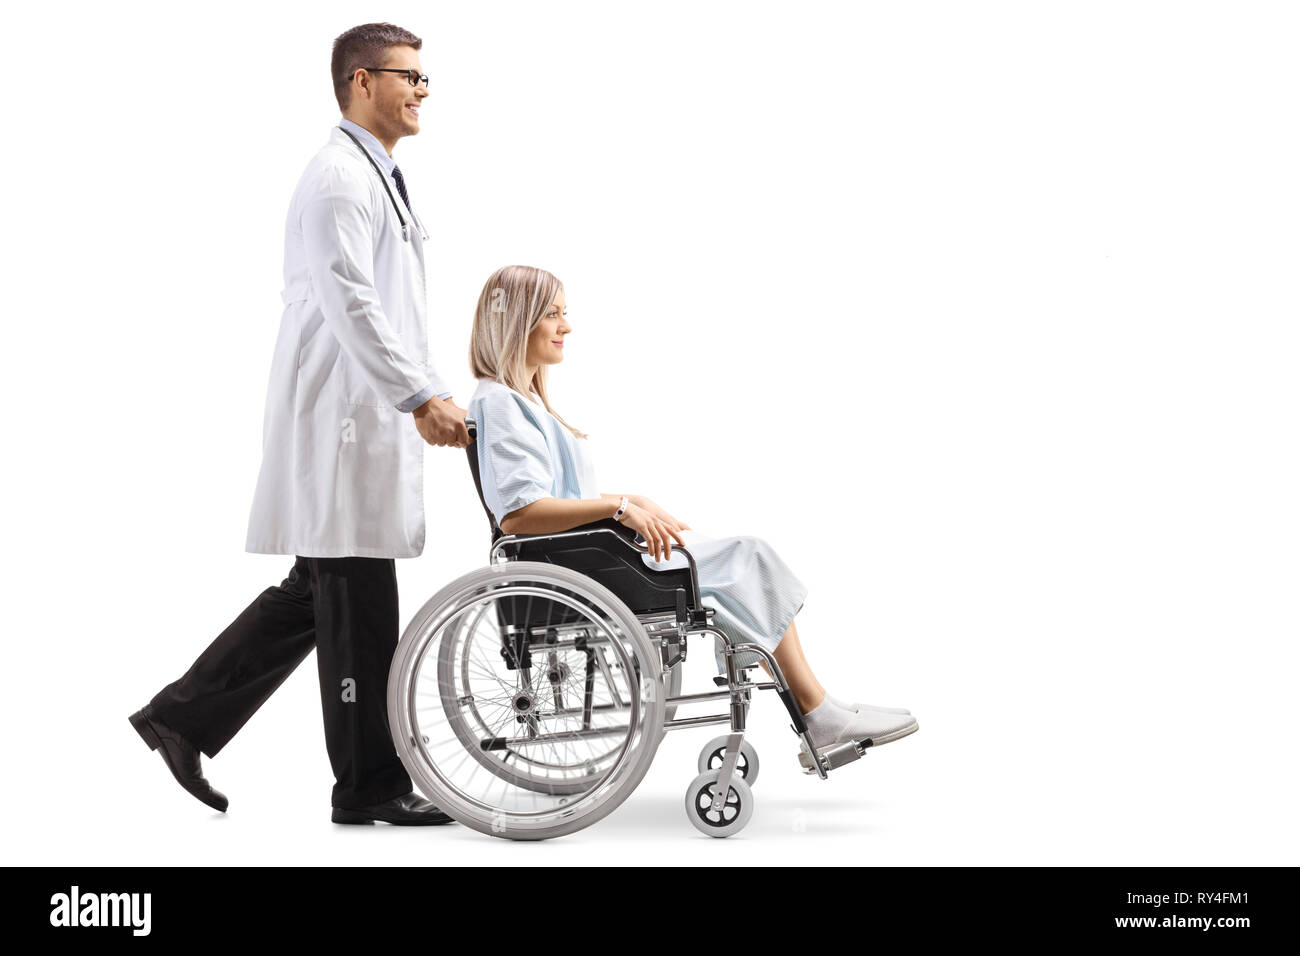 Full length shot of a young male doctor pushing a female patient in a wheelchair isolated on white background Stock Photo